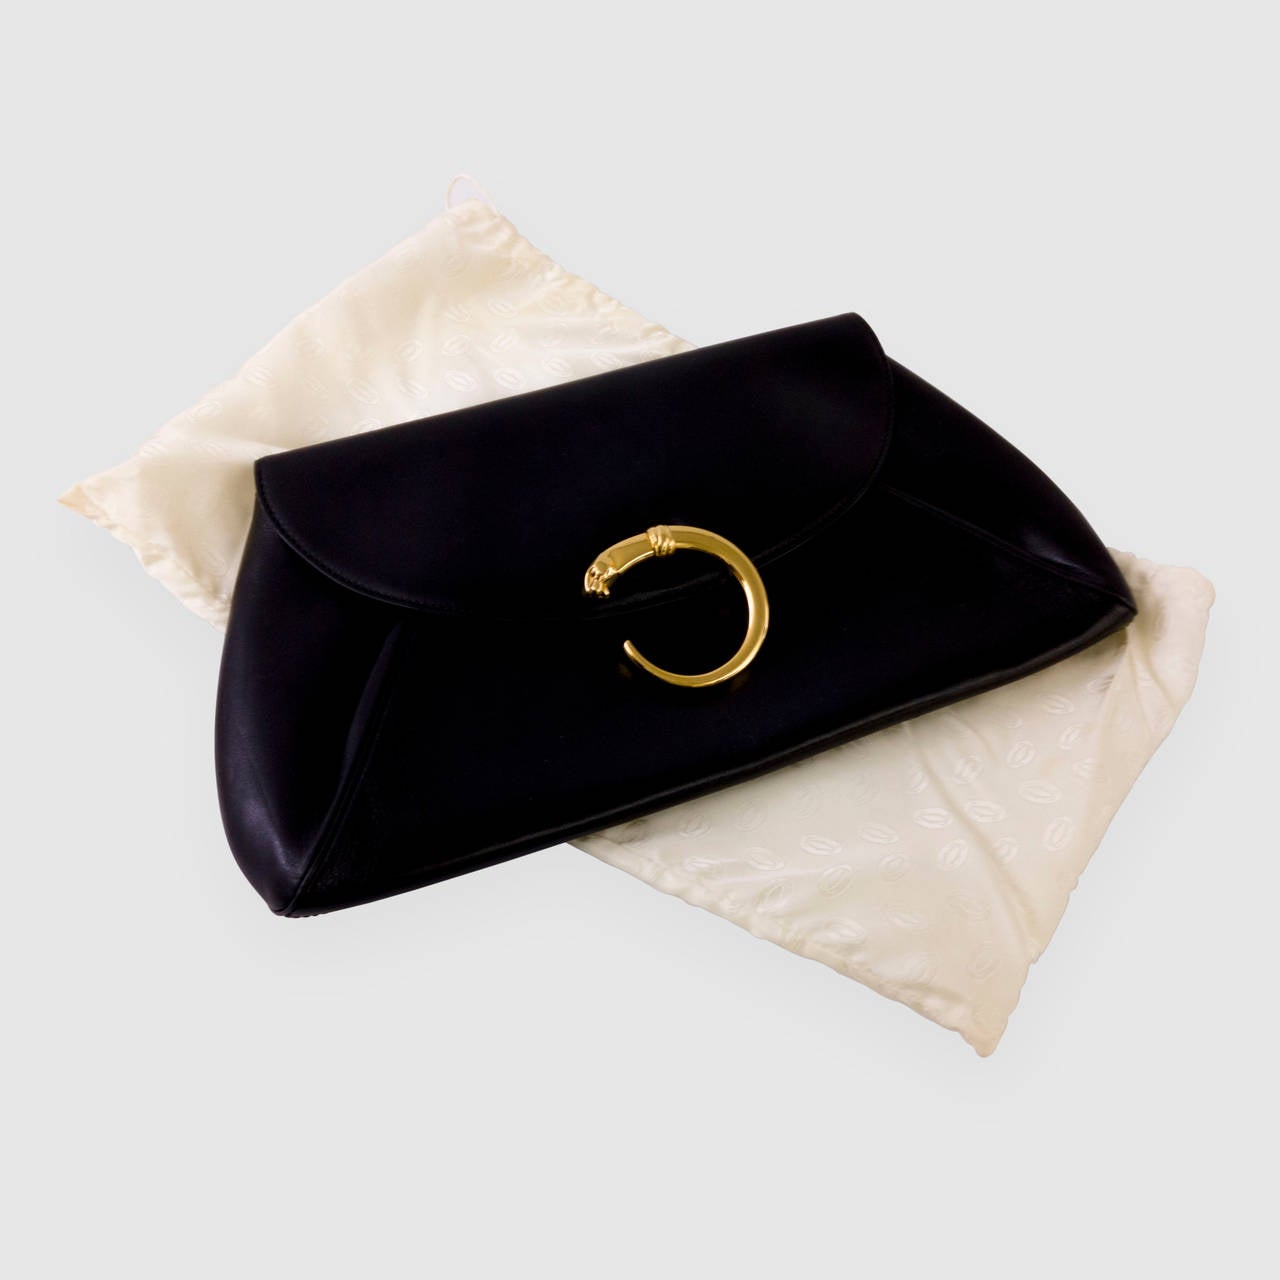 Chic CARTIER Black Leather Clutch Purse featuring a Gold Panther Closure; Striking Red interior with zipper; 14” x 7.5”; comes with original dust cover. A Must Have Timeless Classic you’ll turn to time and again!